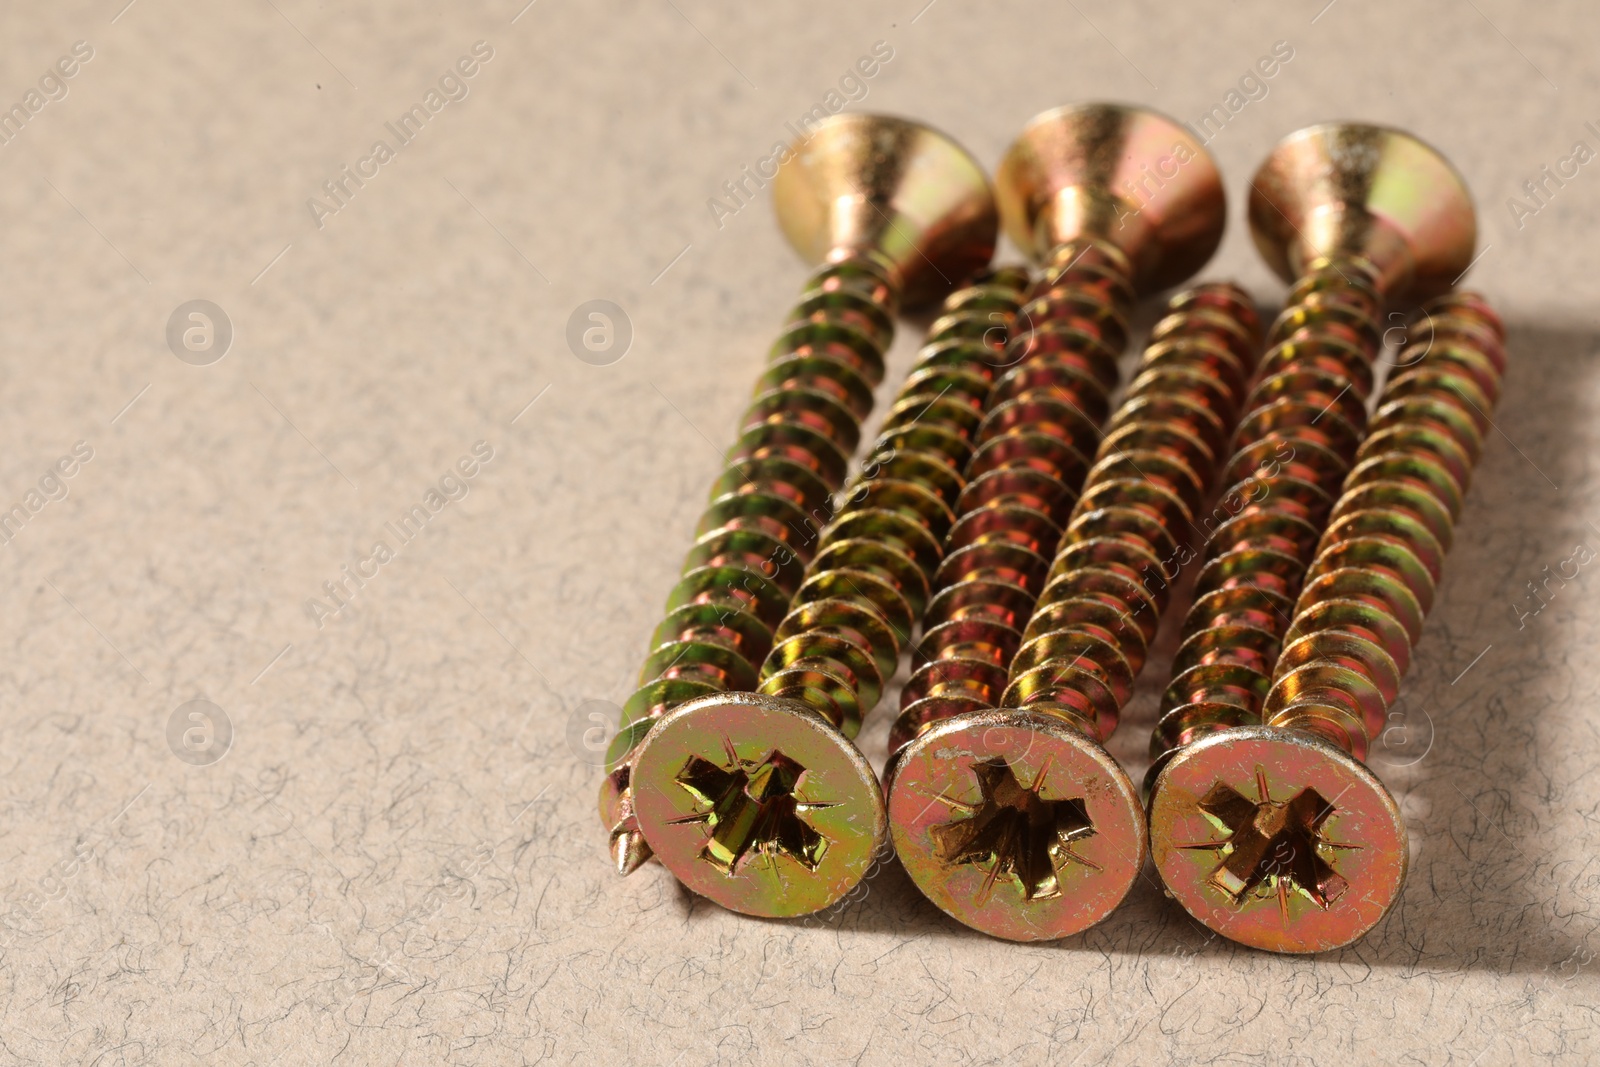 Photo of Many metal screws on beige background, closeup. Space for text